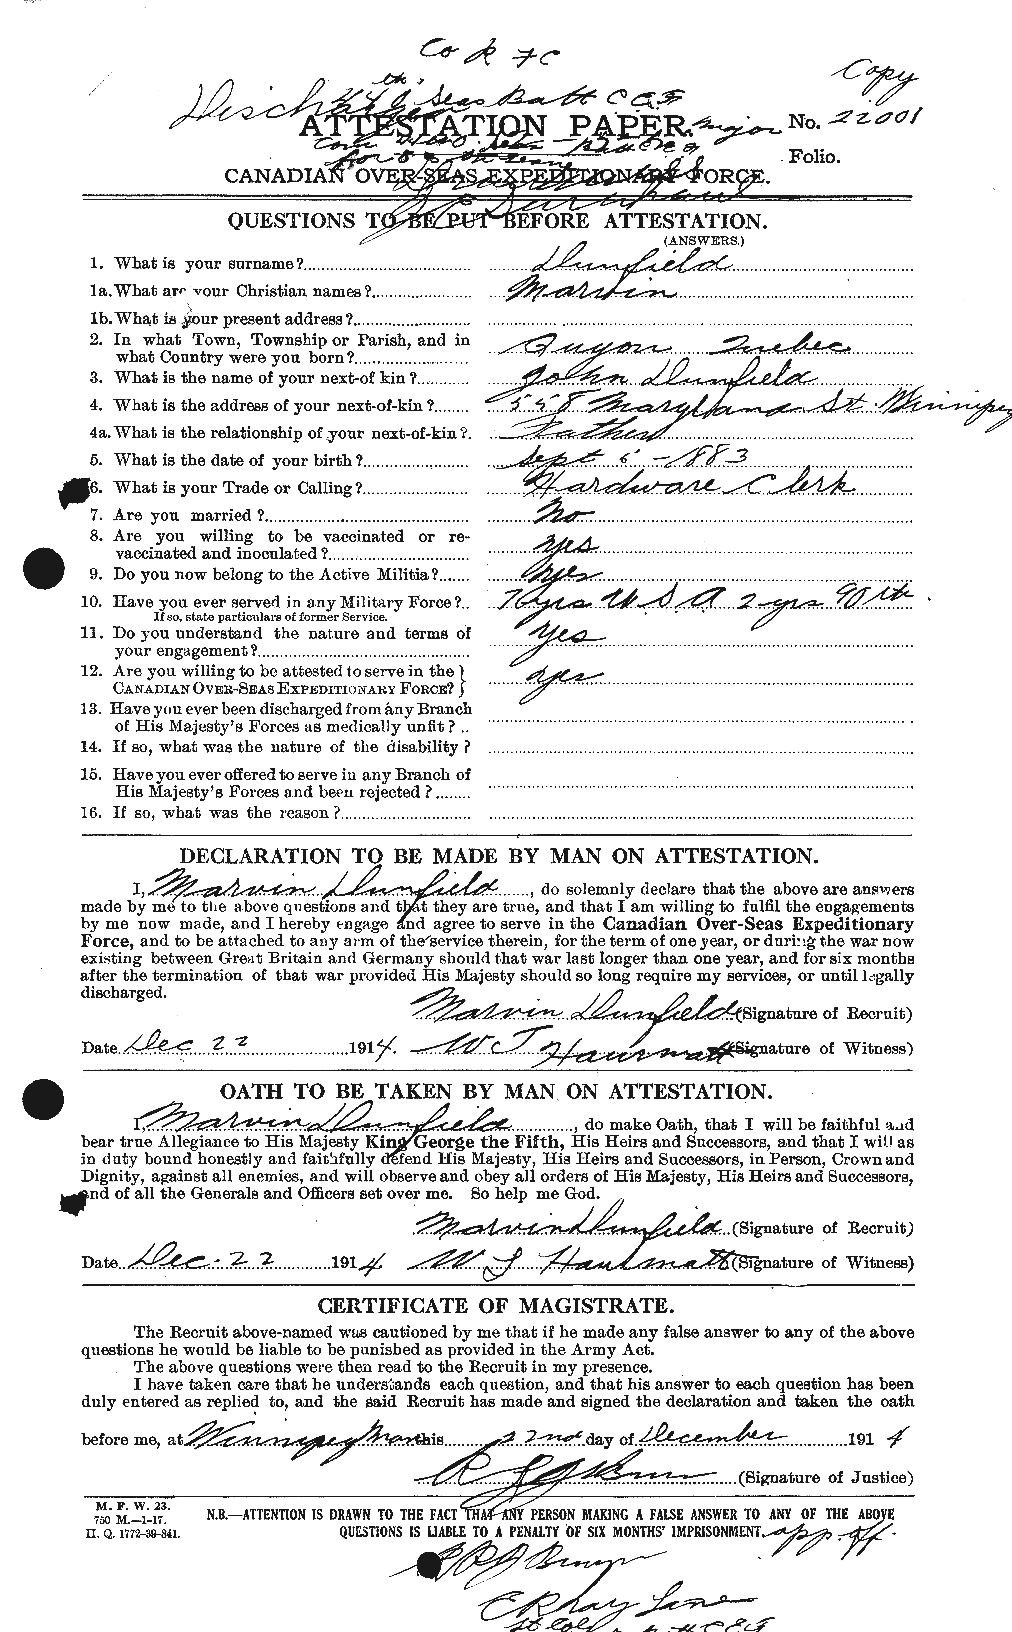 Personnel Records of the First World War - CEF 302462a